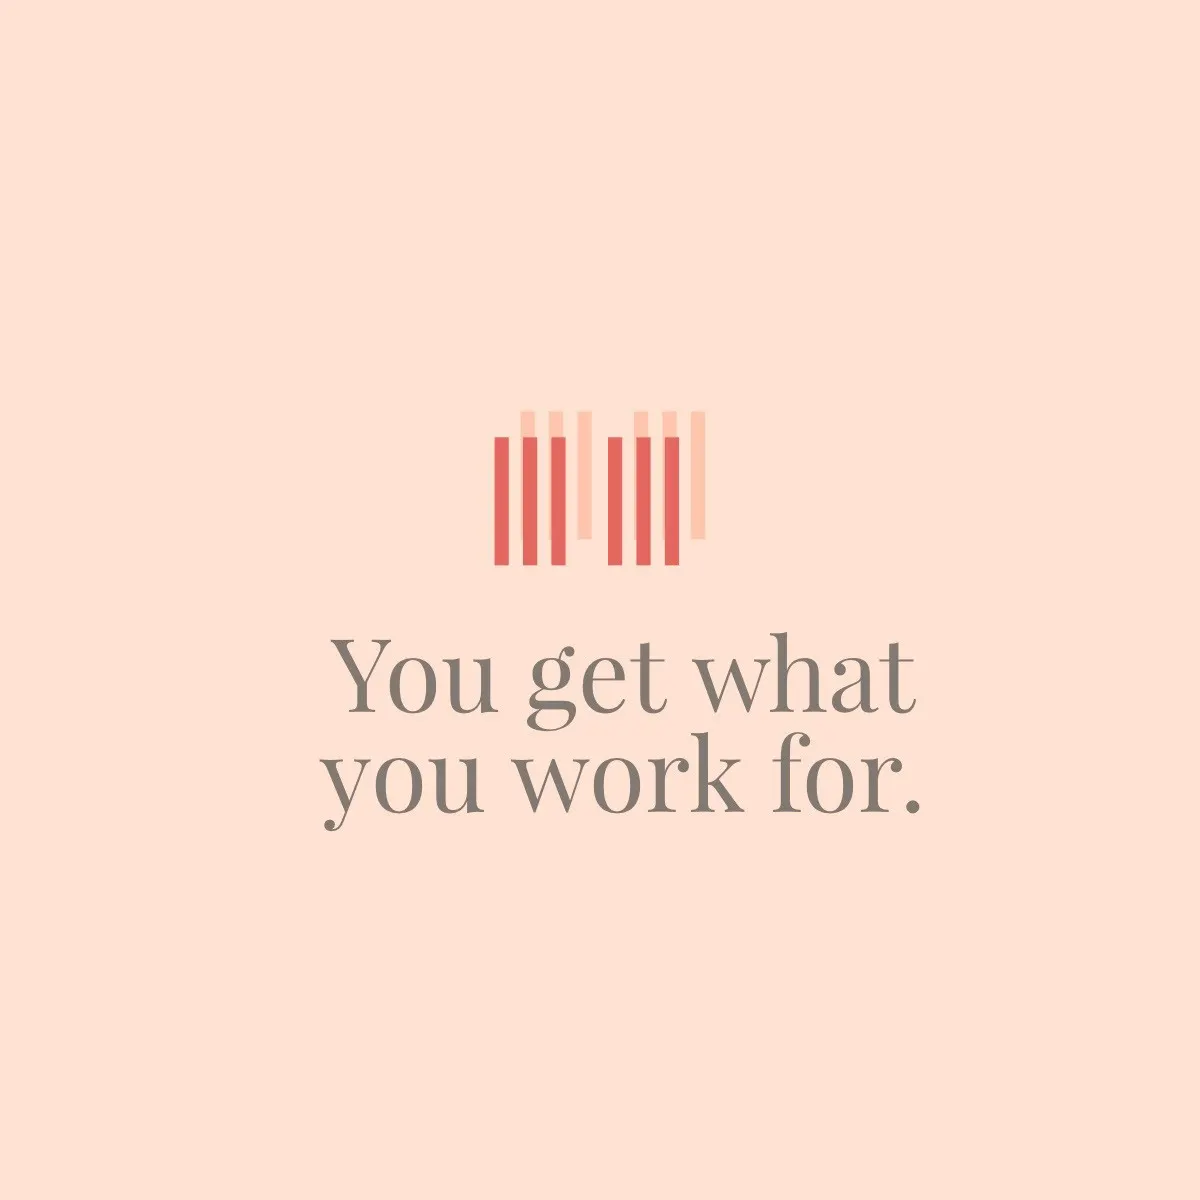 You get what you work for.